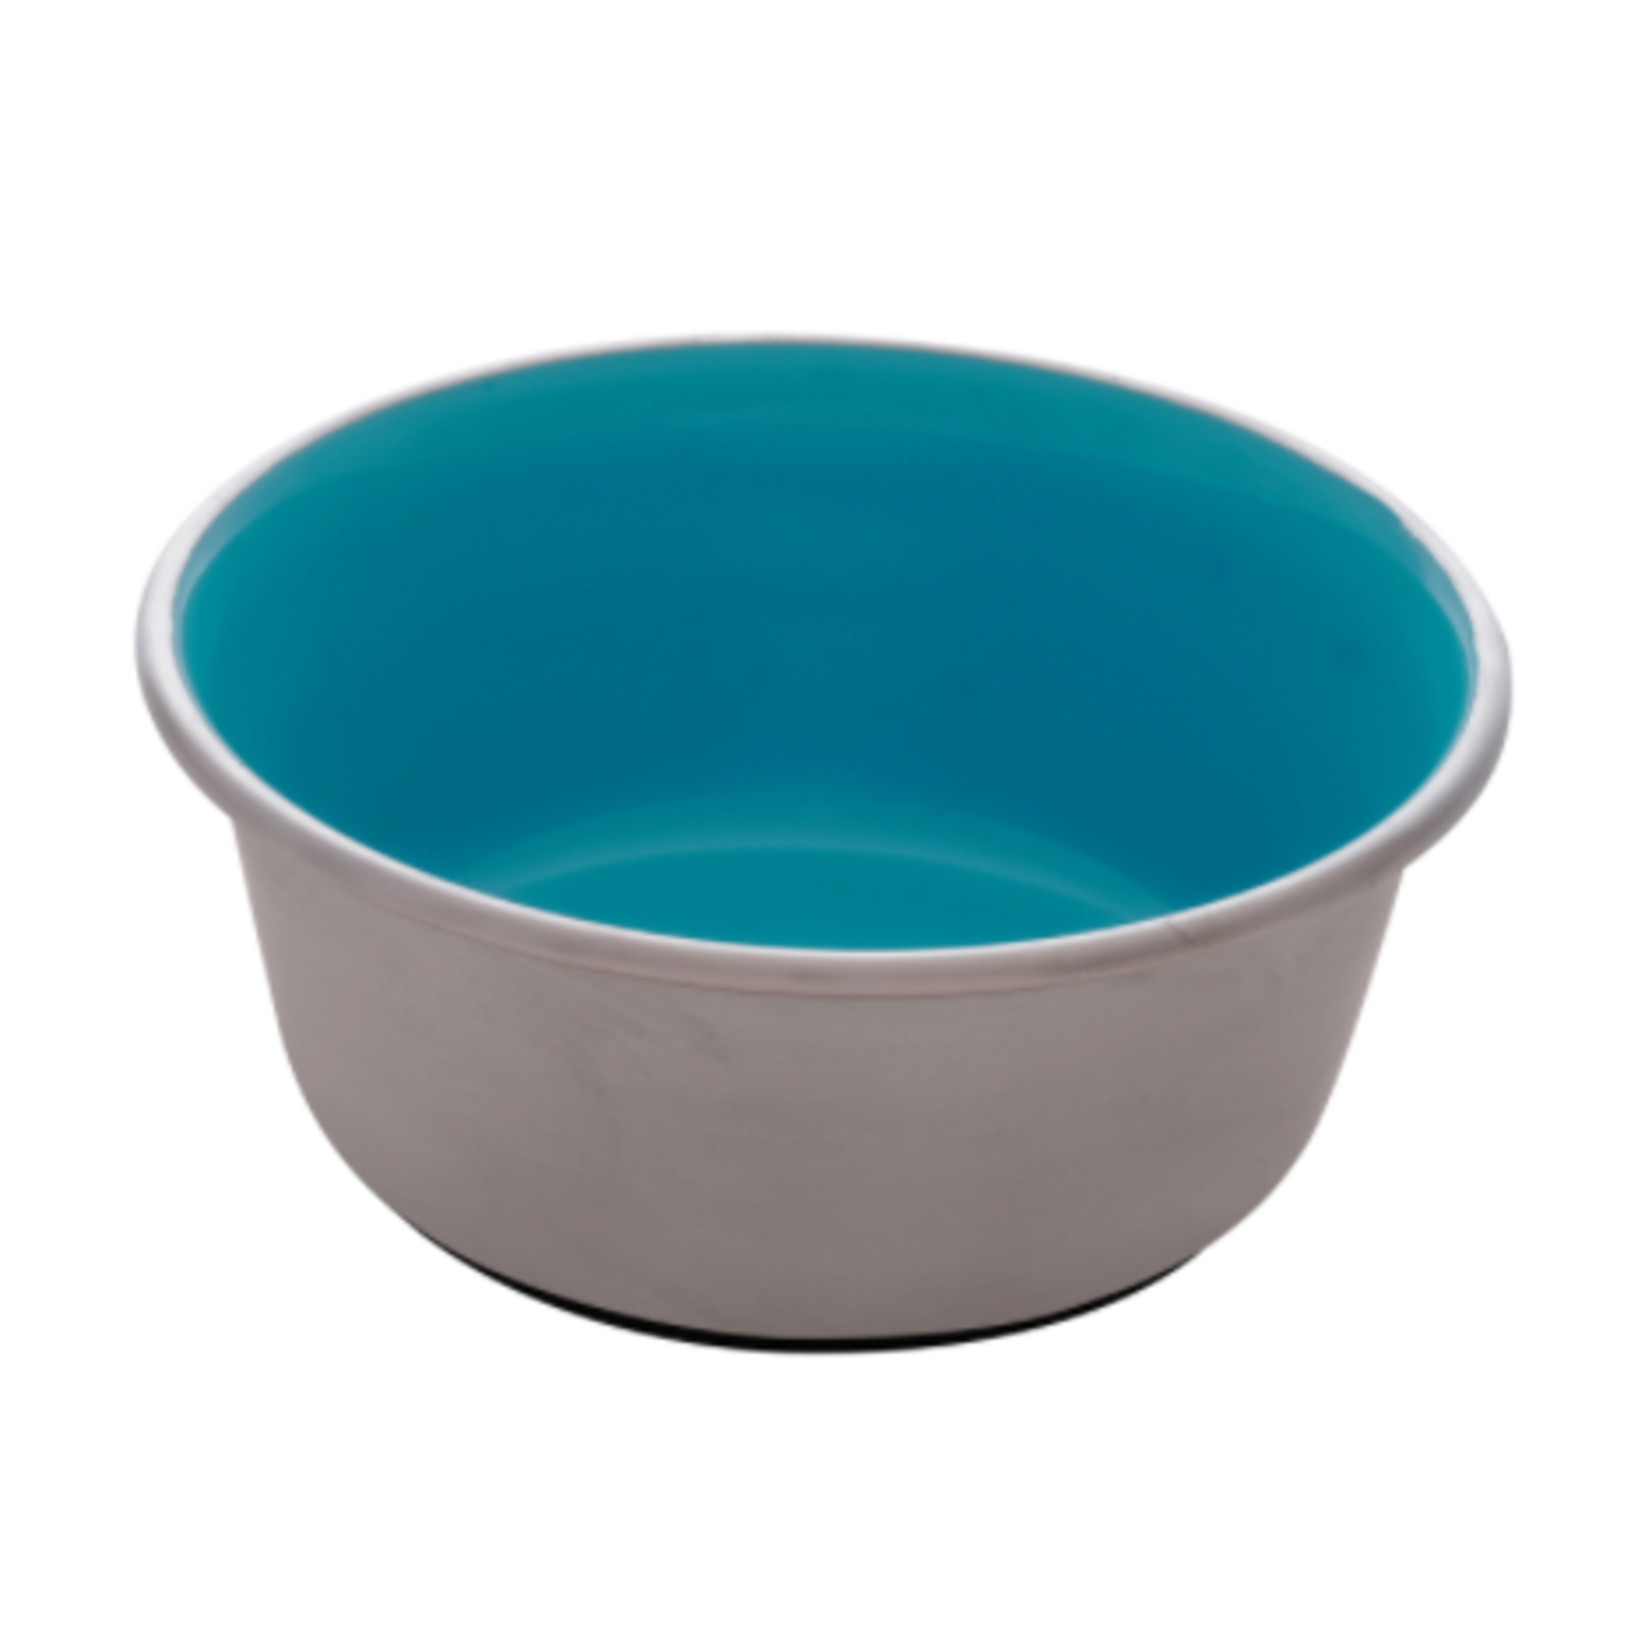 Bailey Stainless Steel Non-Skid Bowl - Blue